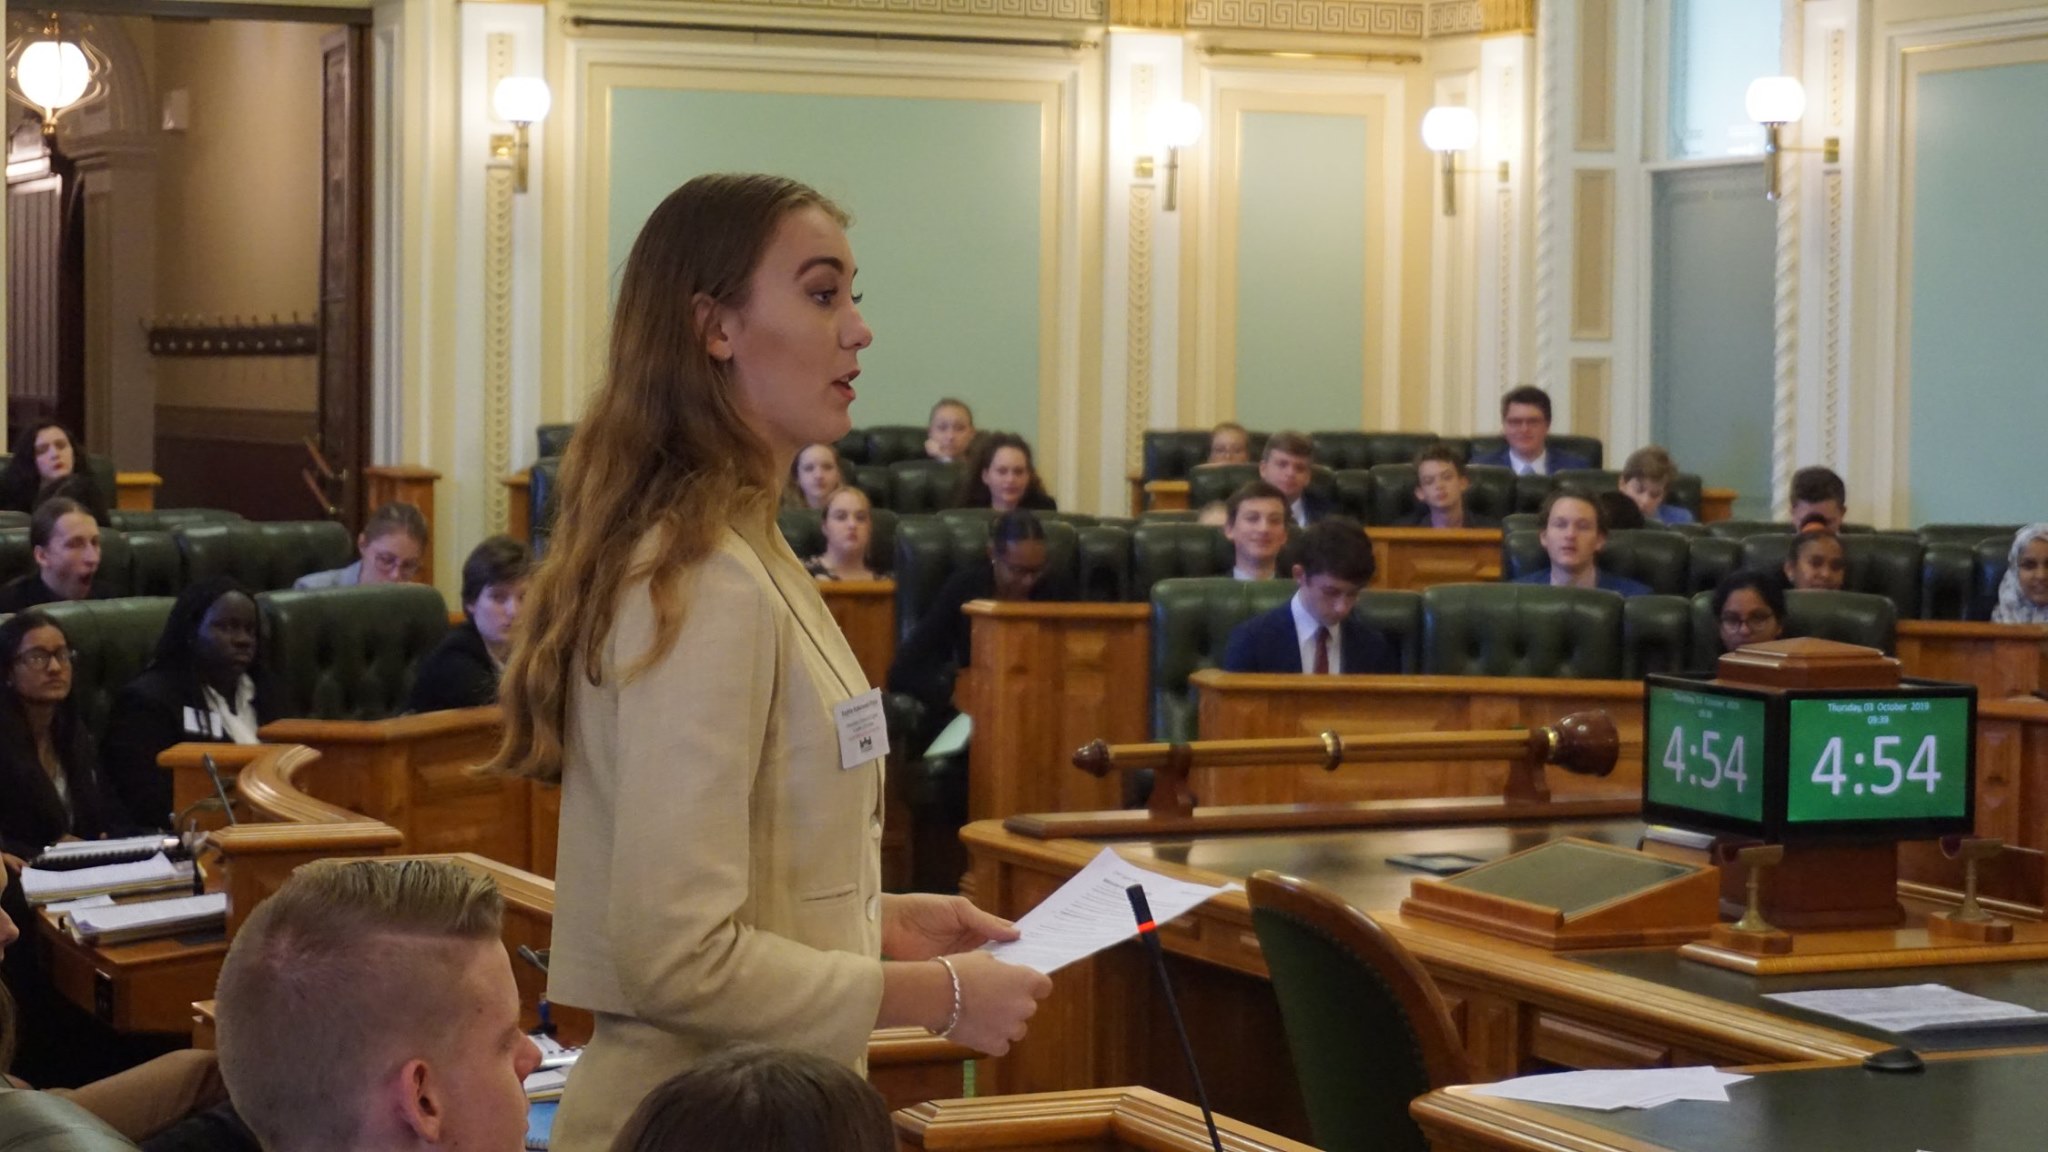 Sophie speaking at youth parliament 